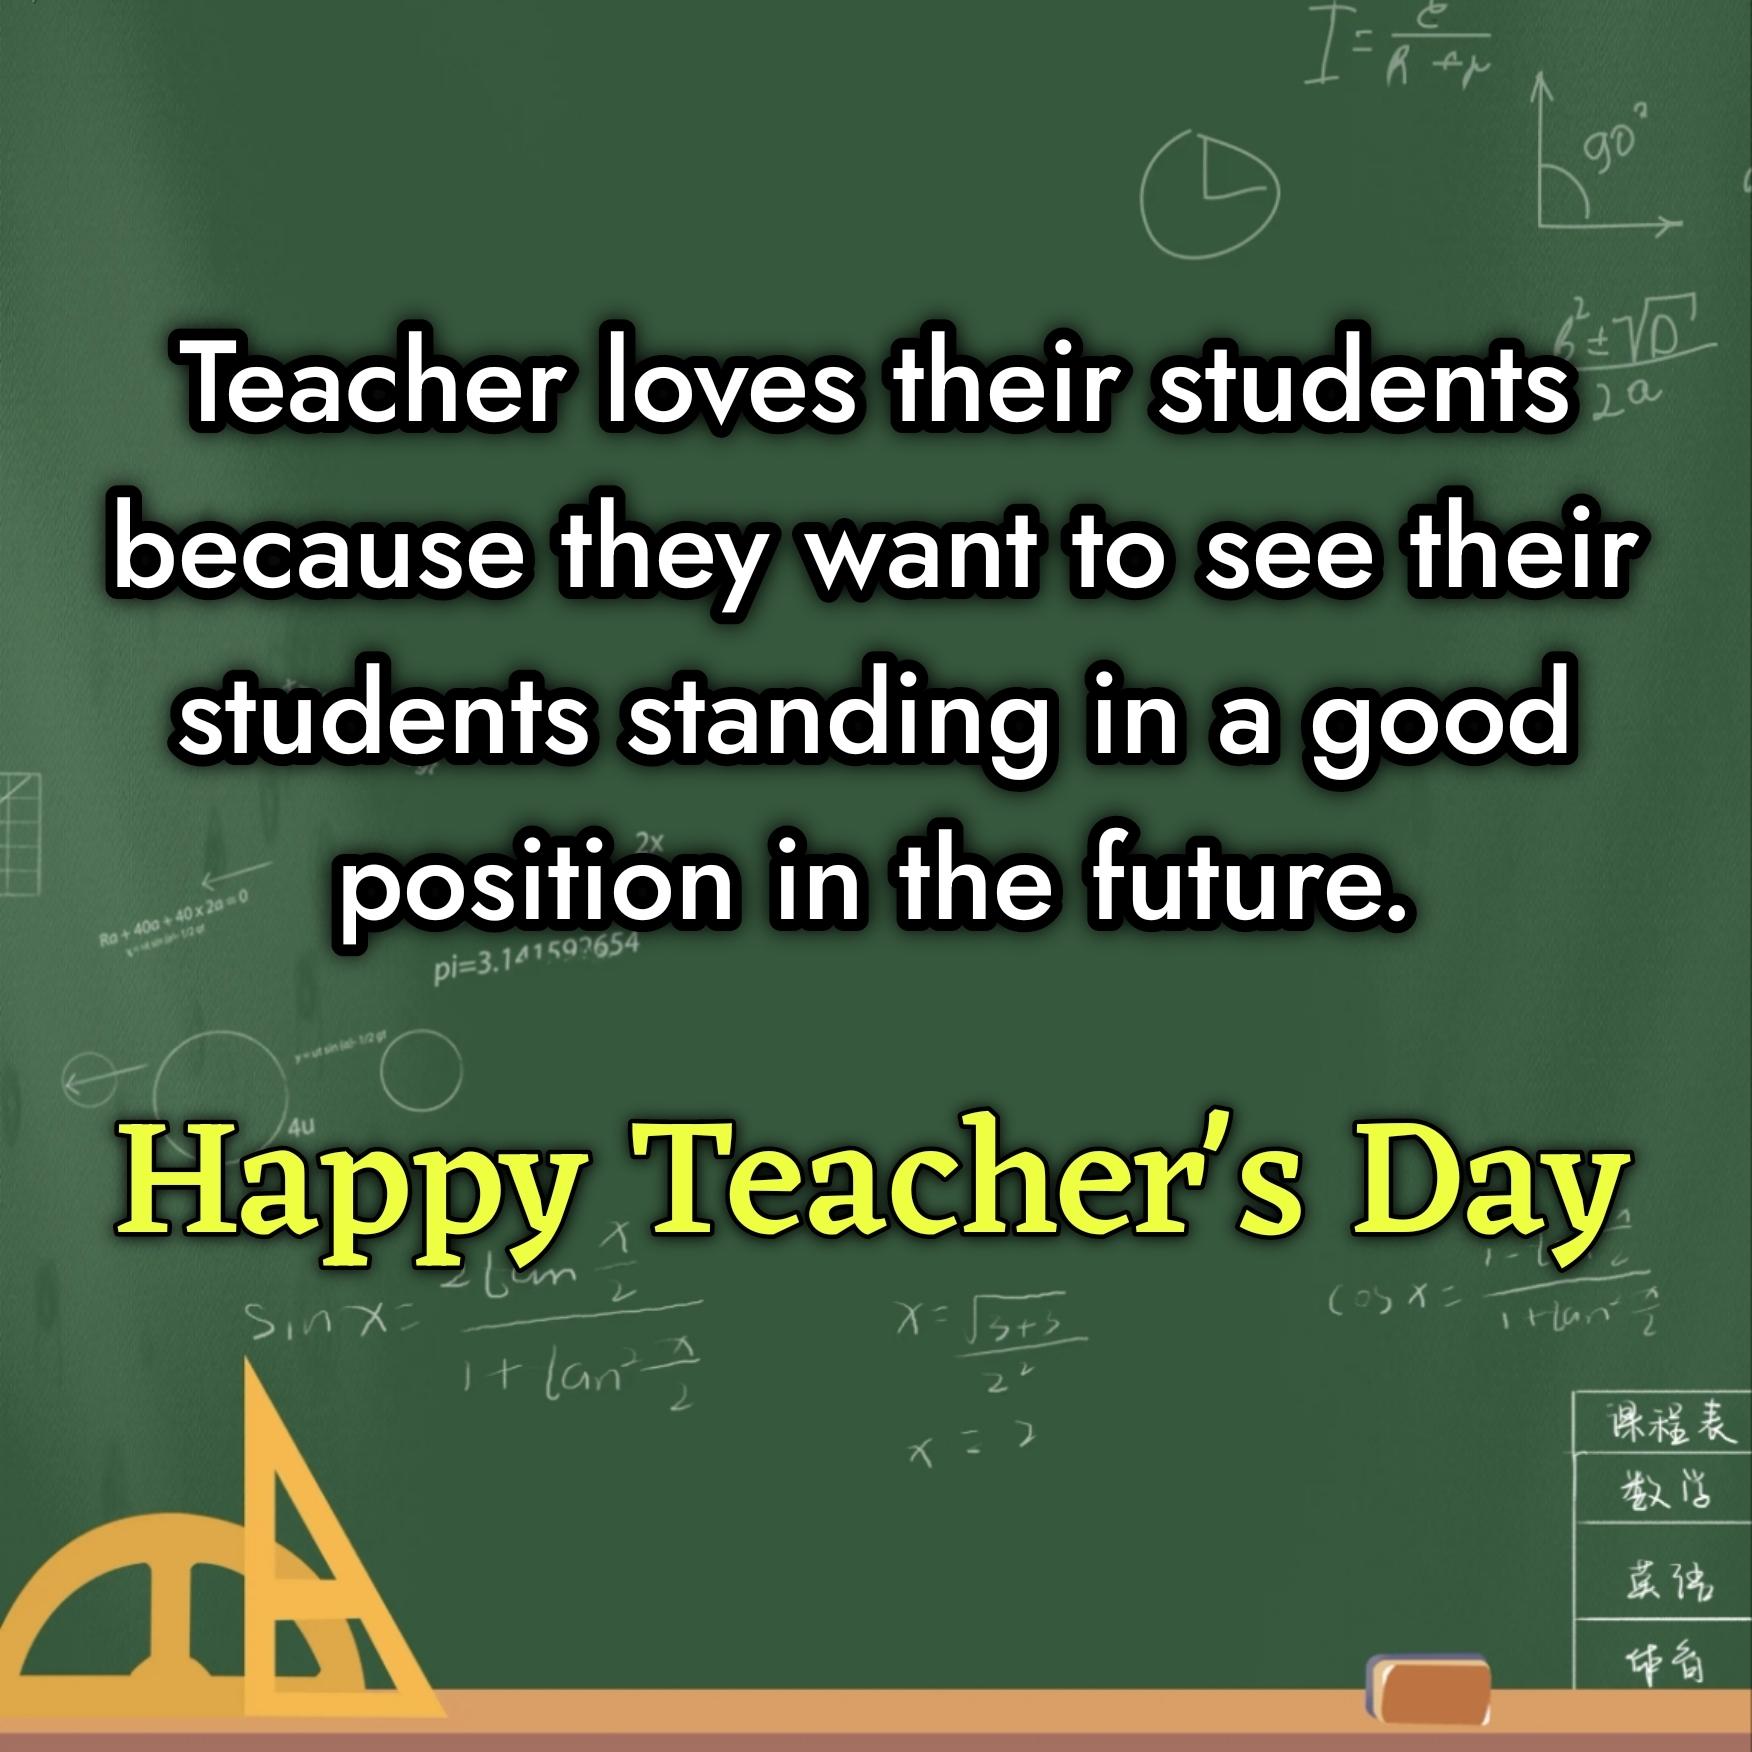 Teacher loves their students because they want to see